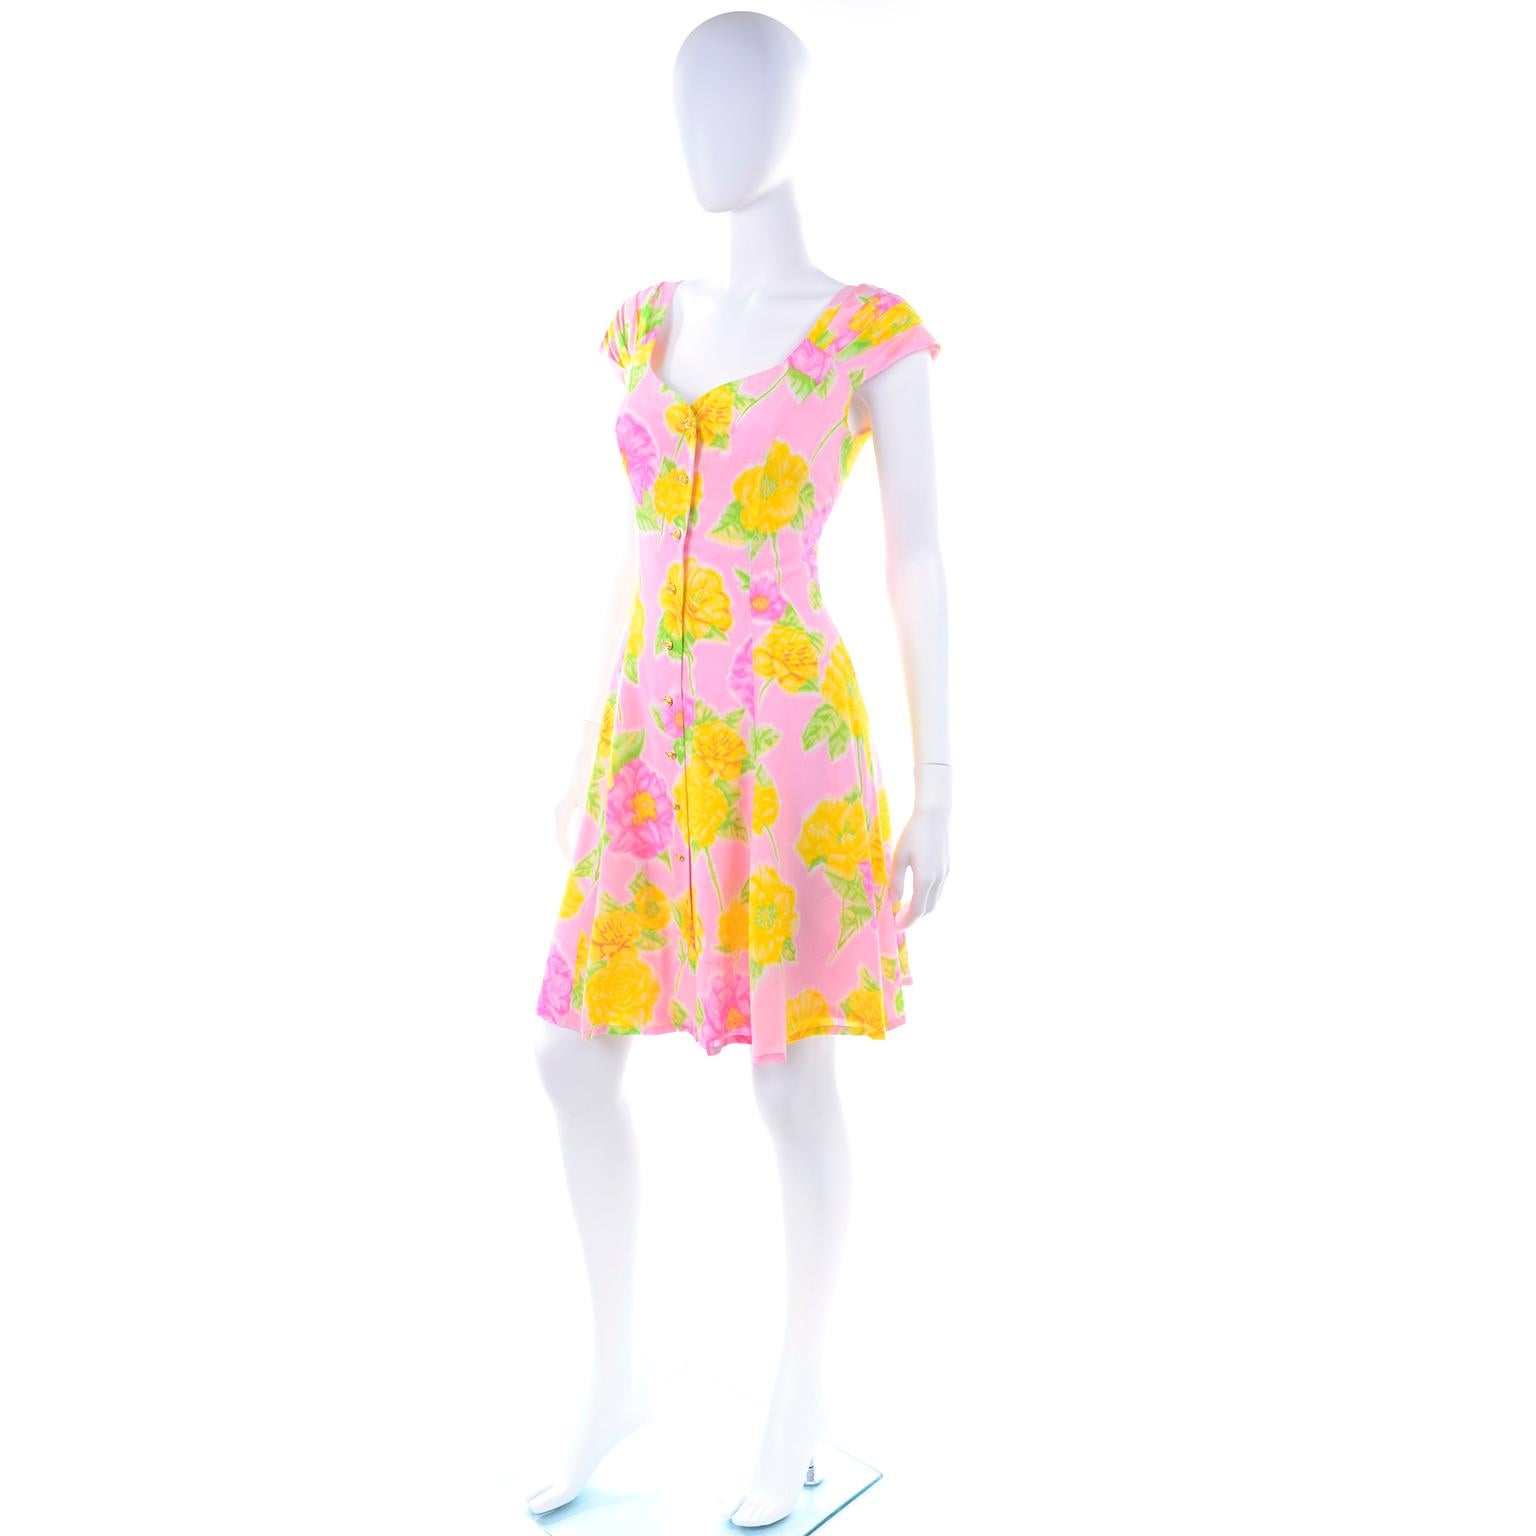 This pretty pink, yellow and green floral Escada dress was designed by Margaretha Ley and was never worn!  The dress still has its original tags attached and is labeled a size 36.  Made in Italy of 100% silk, this lovely dress has pleated cap